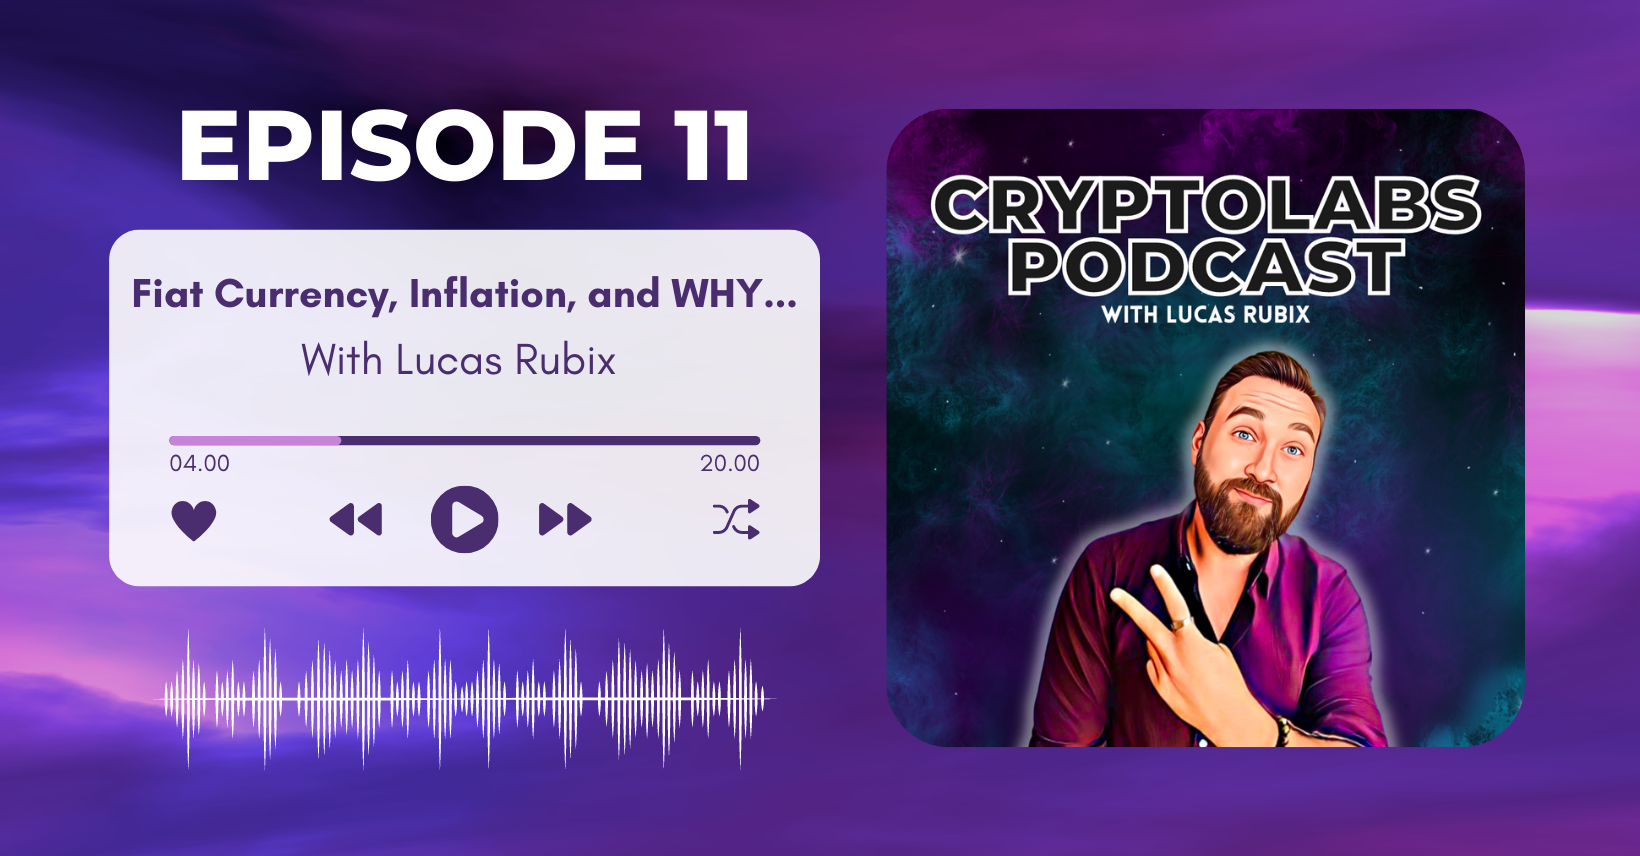 CryptoLabs podcast with Lucas Rubix